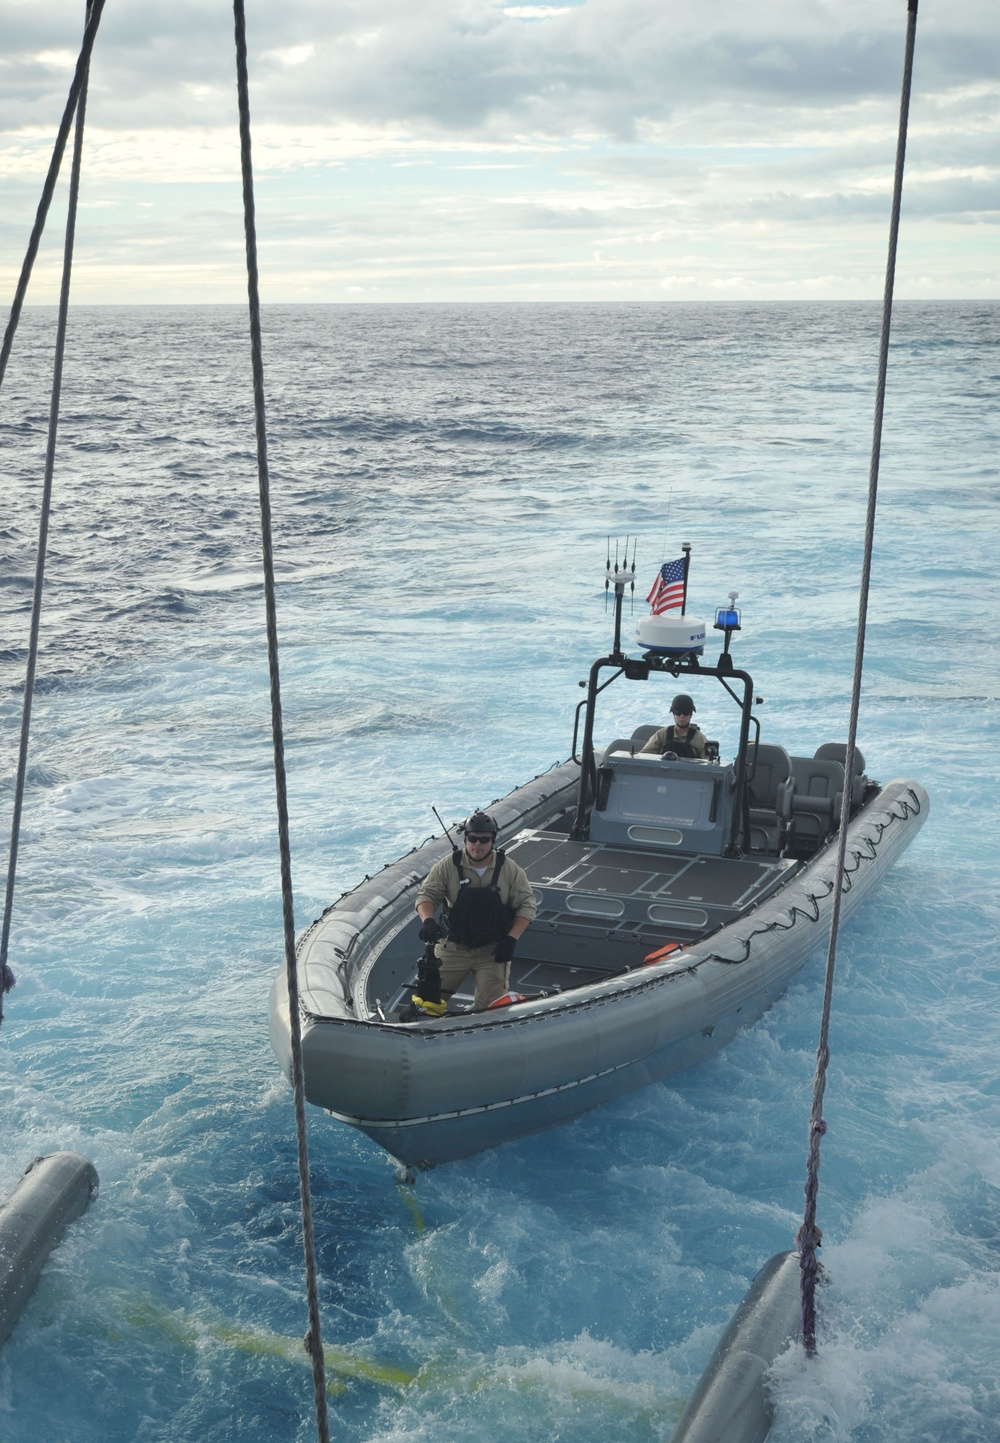 Littoral Combat Ship USS Independence Participates in the at-sea phase of Rim of the Pacific (RIMPAC) Exercise 2014